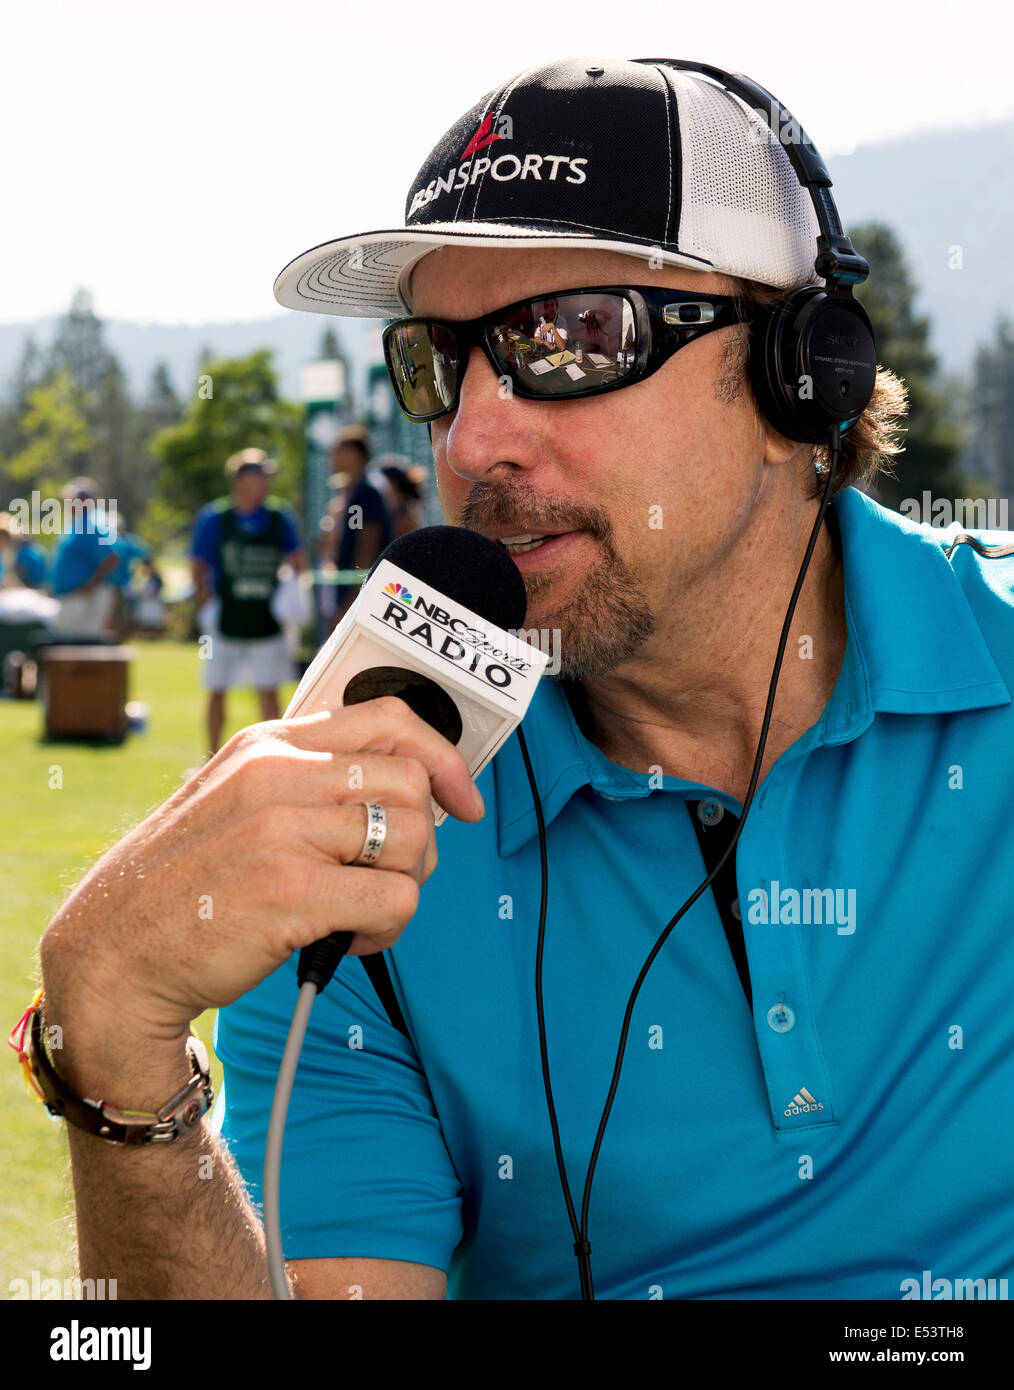 Stateline, Nevada, USA. 19th July, 2014. Comedian KEVIN NEALON does a radio interview prior to his tee time at Edgewood Tahoe on the second day of competition at the 25th Annual American Century Championship. Credit:  Brian Cahn/ZUMA Wire/Alamy Live News Stock Photo